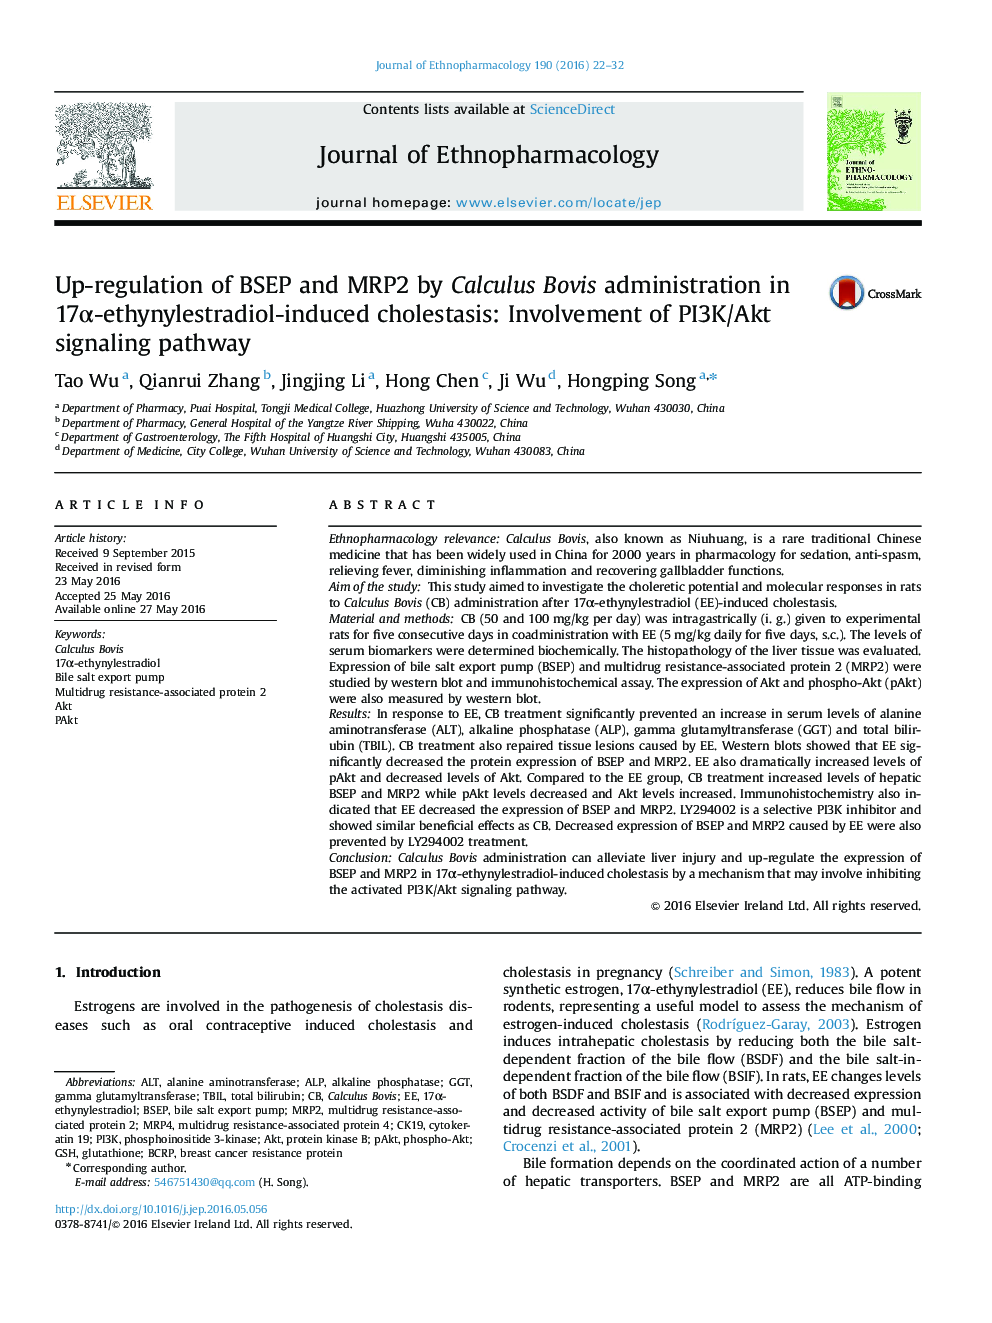 Up-regulation of BSEP and MRP2 by Calculus Bovis administration in 17α-ethynylestradiol-induced cholestasis: Involvement of PI3K/Akt signaling pathway